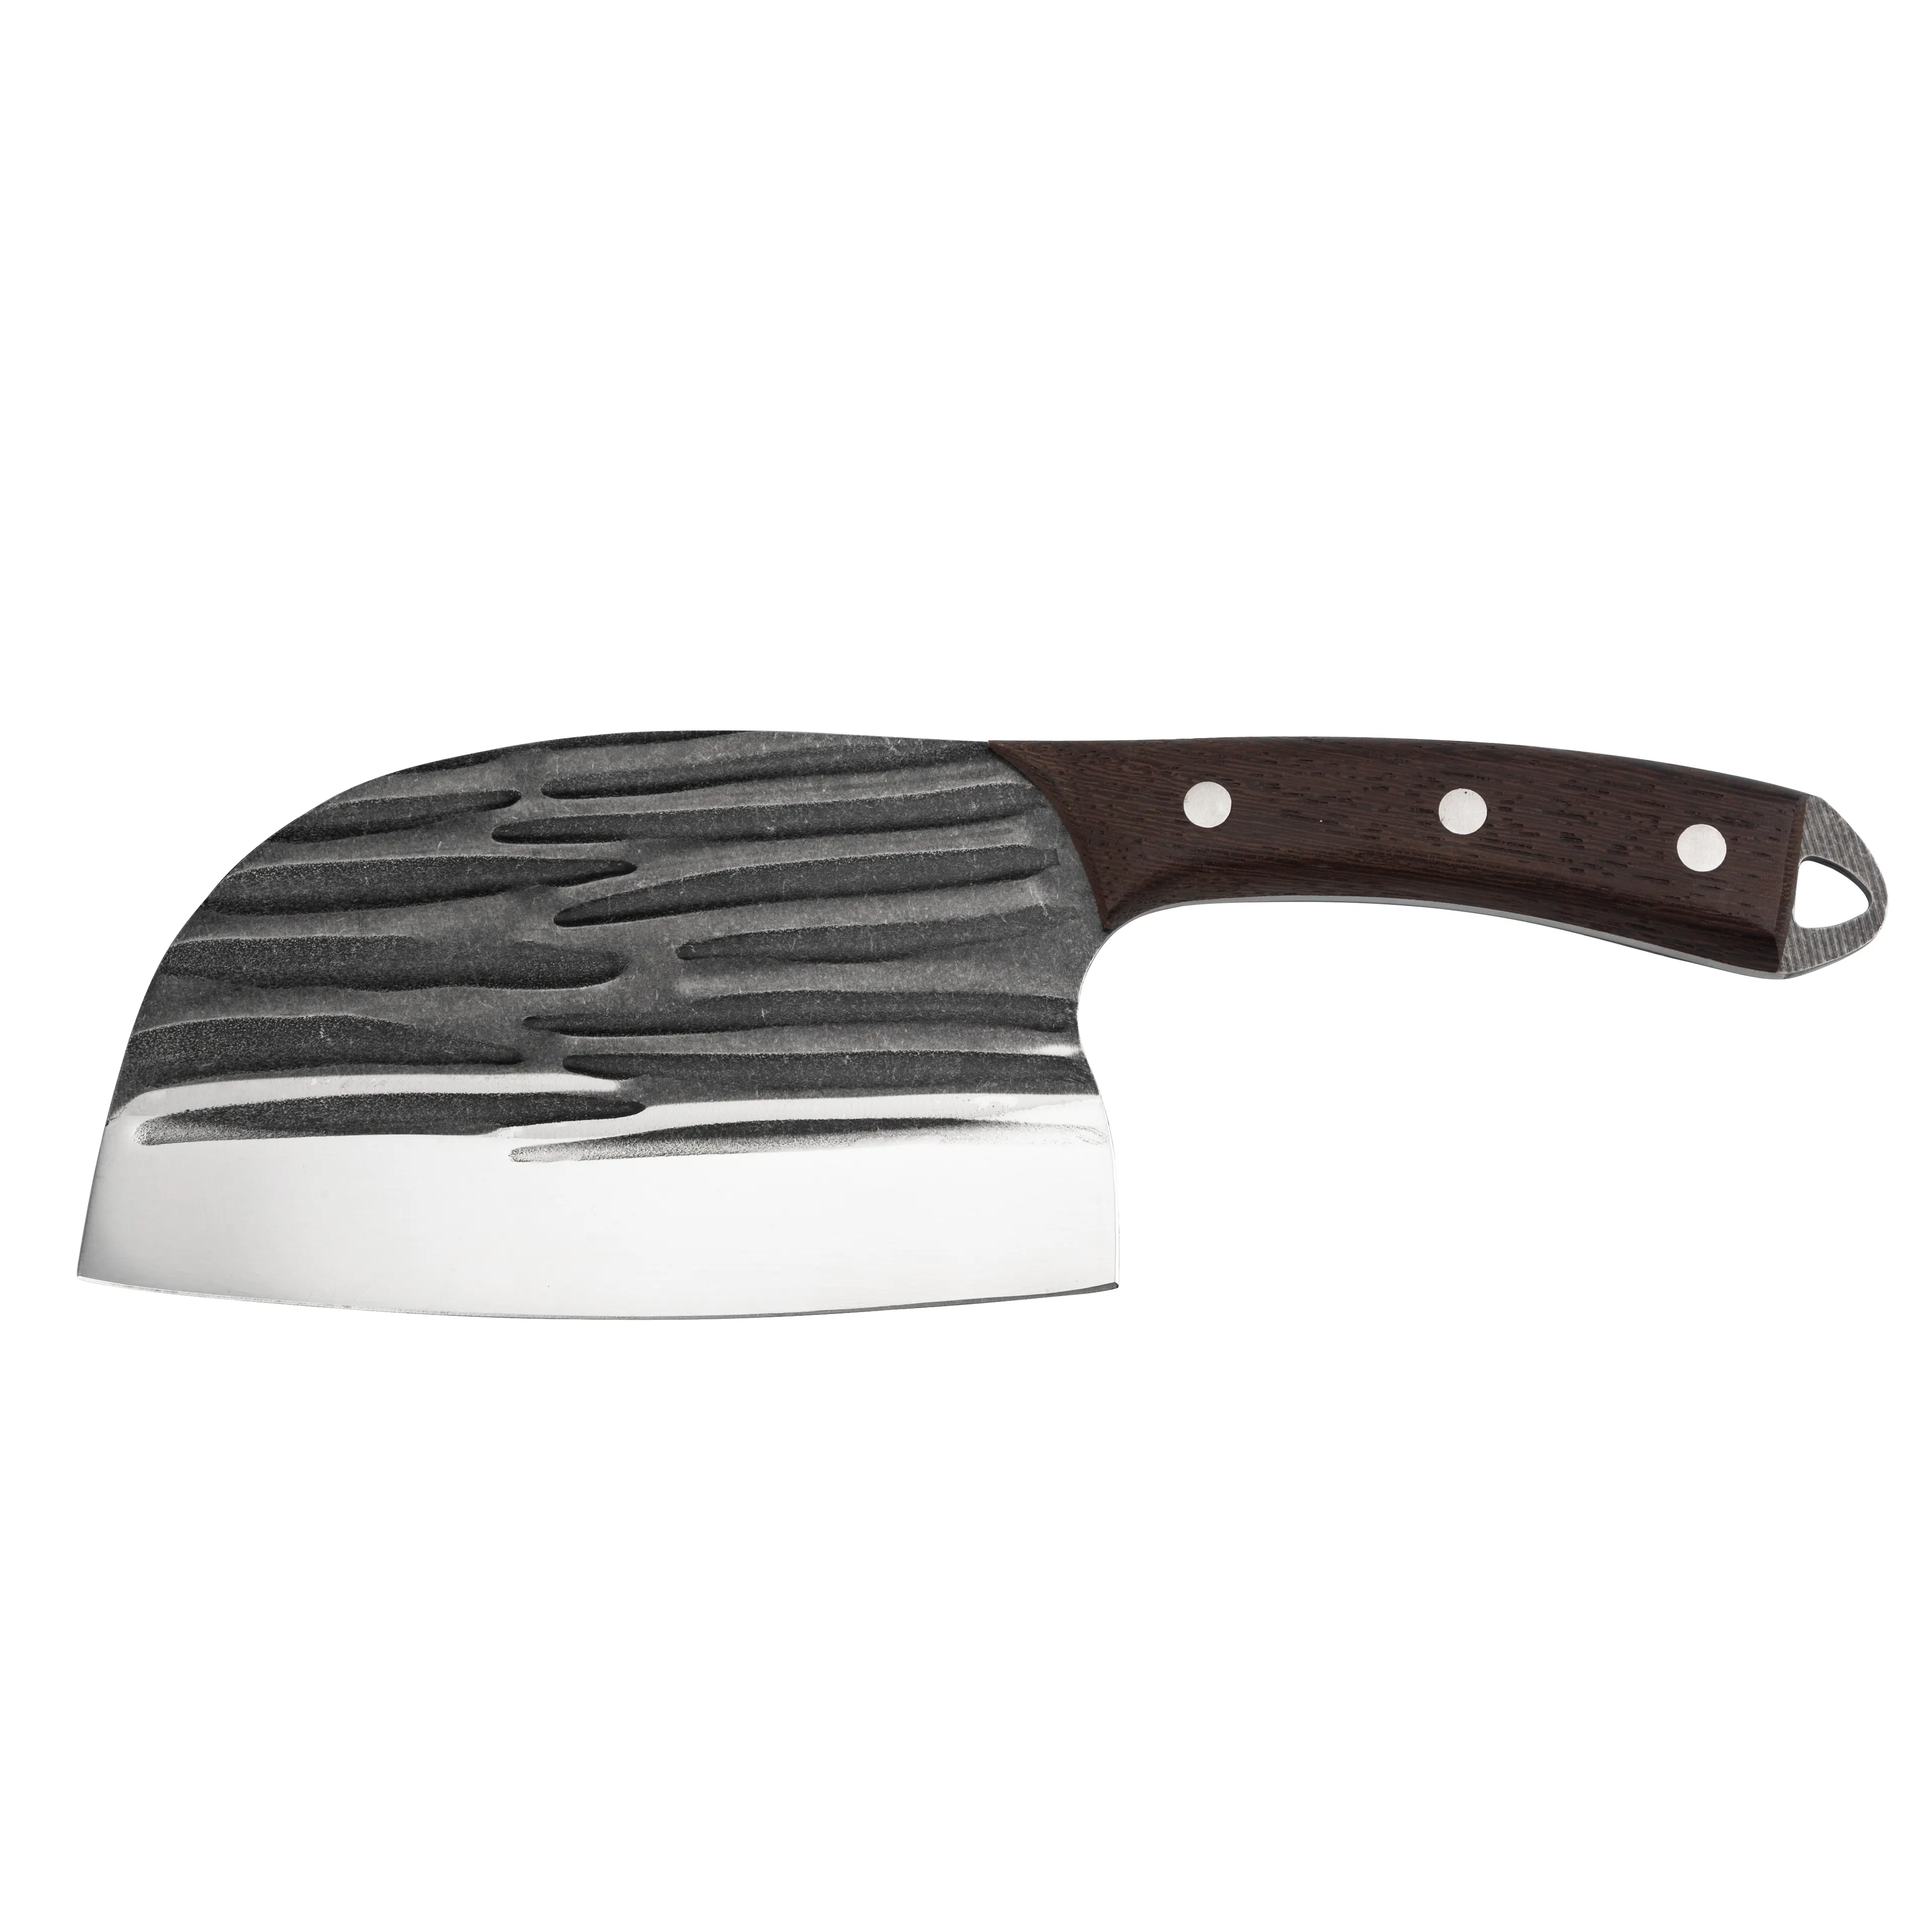 Wooden Handle Stainless Steel Kitchen Knives Ultra Sharp Fish Meat Cutting Skinning Knives For Butcher